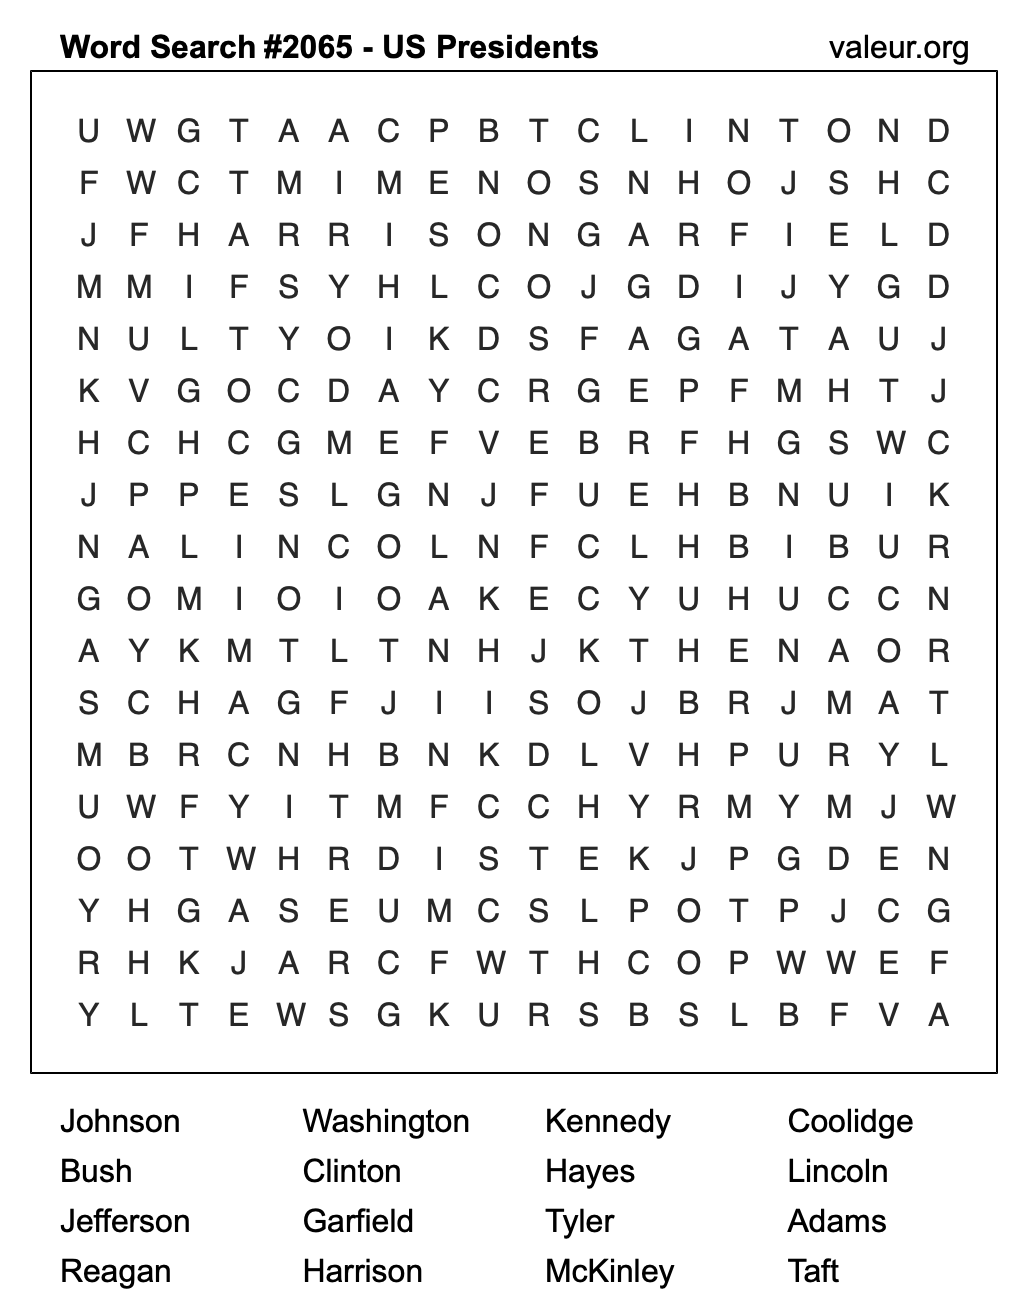 Word Search Puzzle with US Presidents #2065